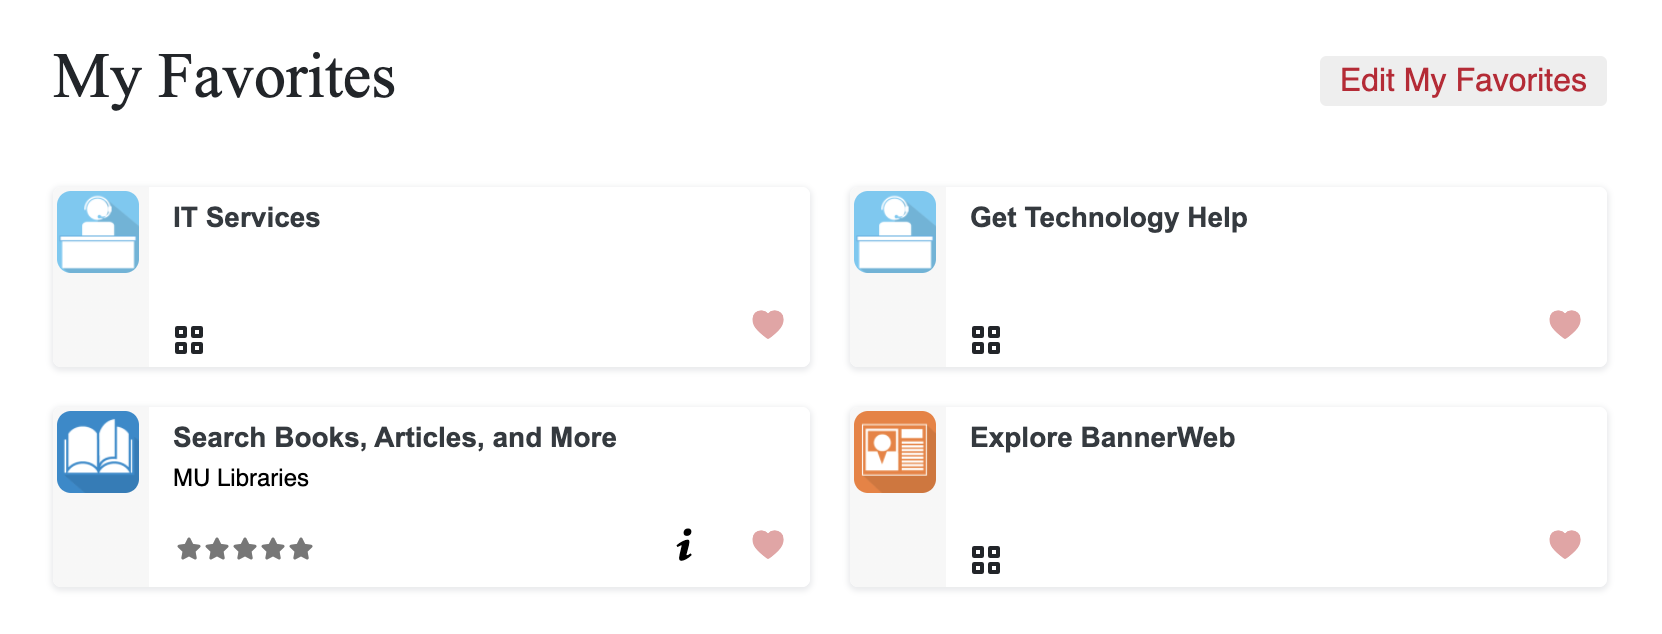 A screenshot of the Favorites section in the new mymiami portal. You can add favorites by pressing the heart icon next to any task, and it will be included here.